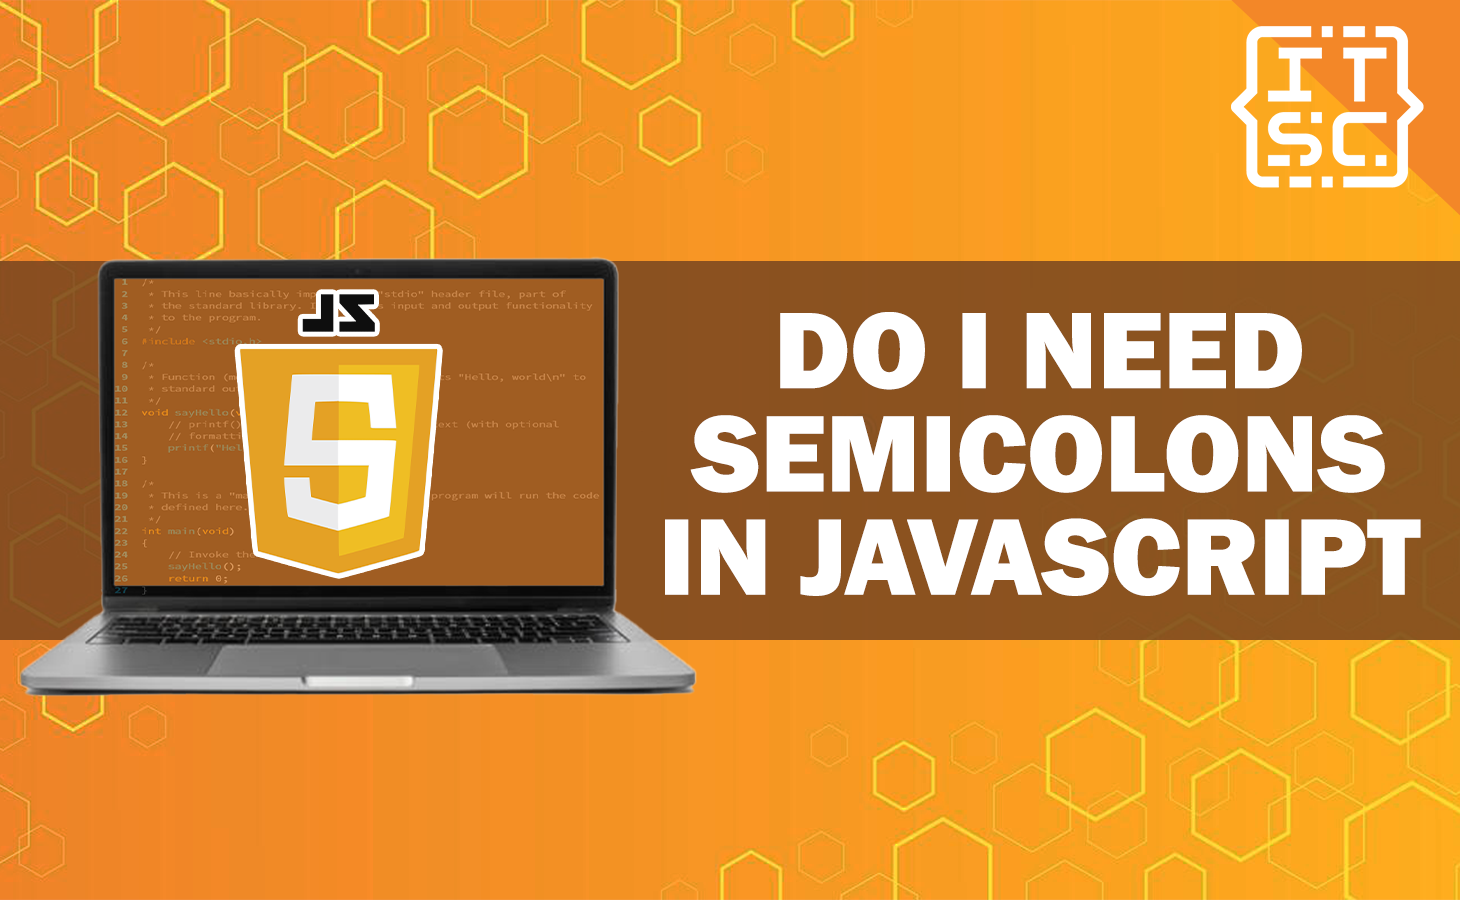 Do I Need Semicolons in JavaScript